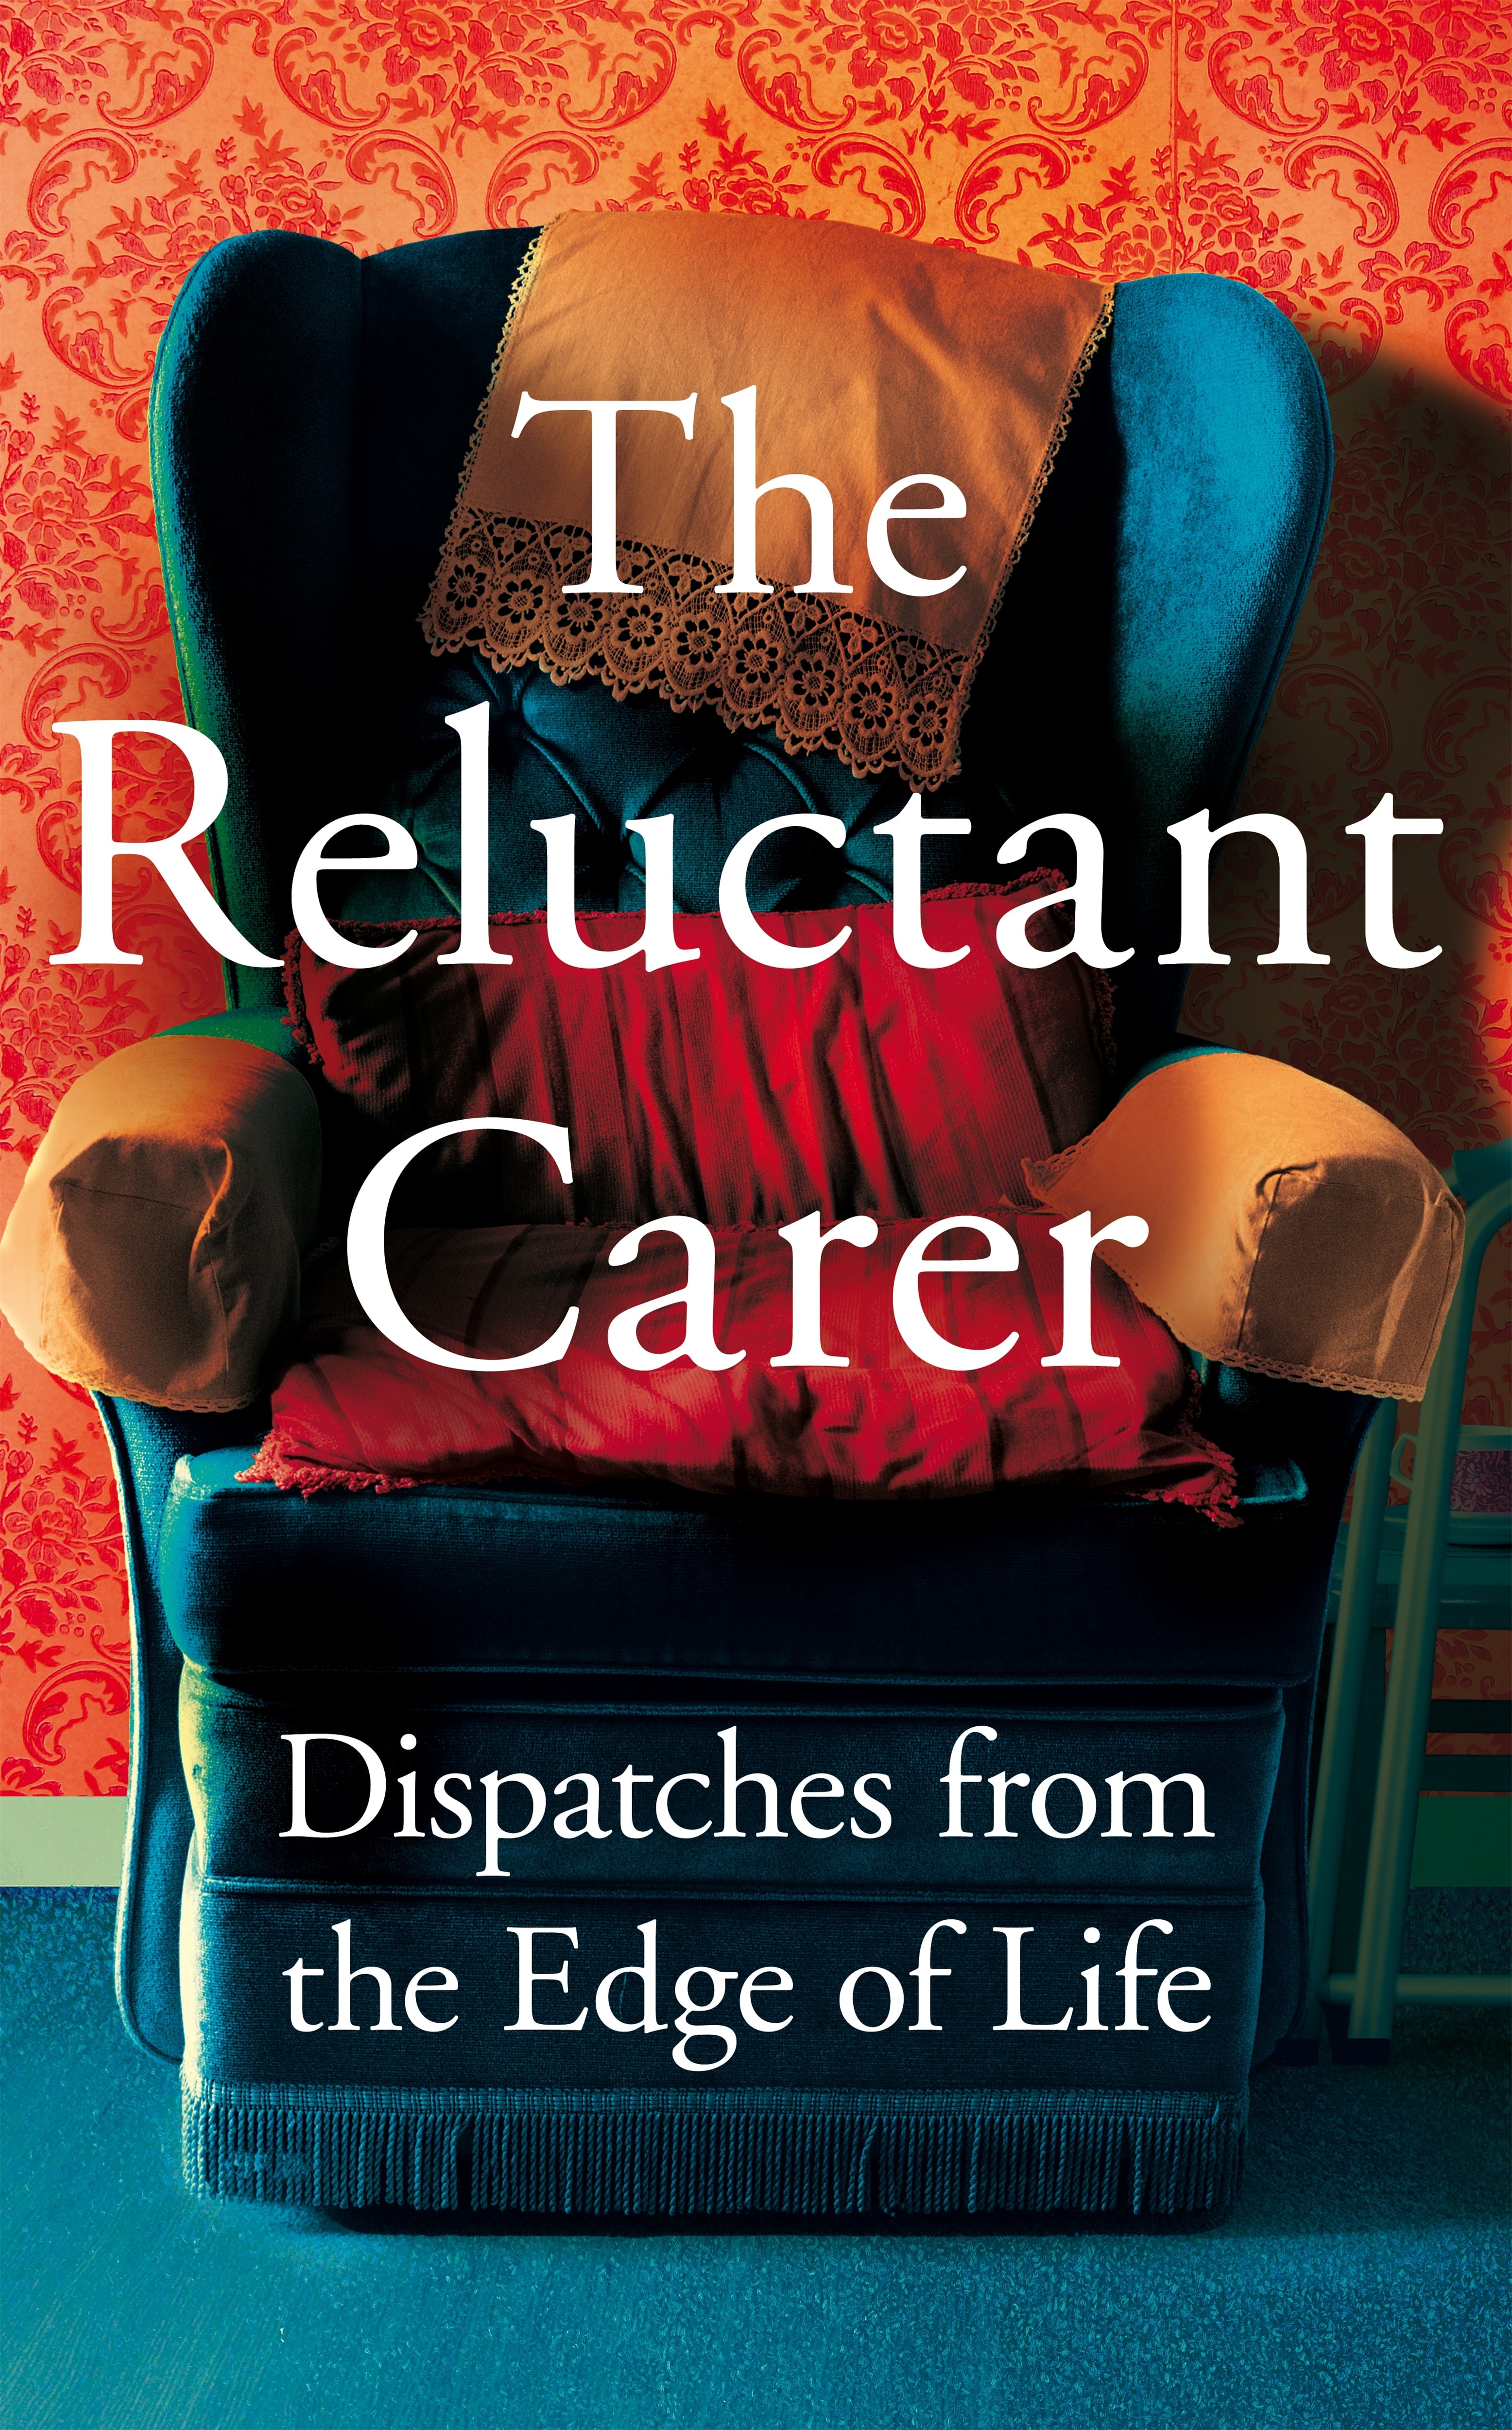 The Reluctant Carer